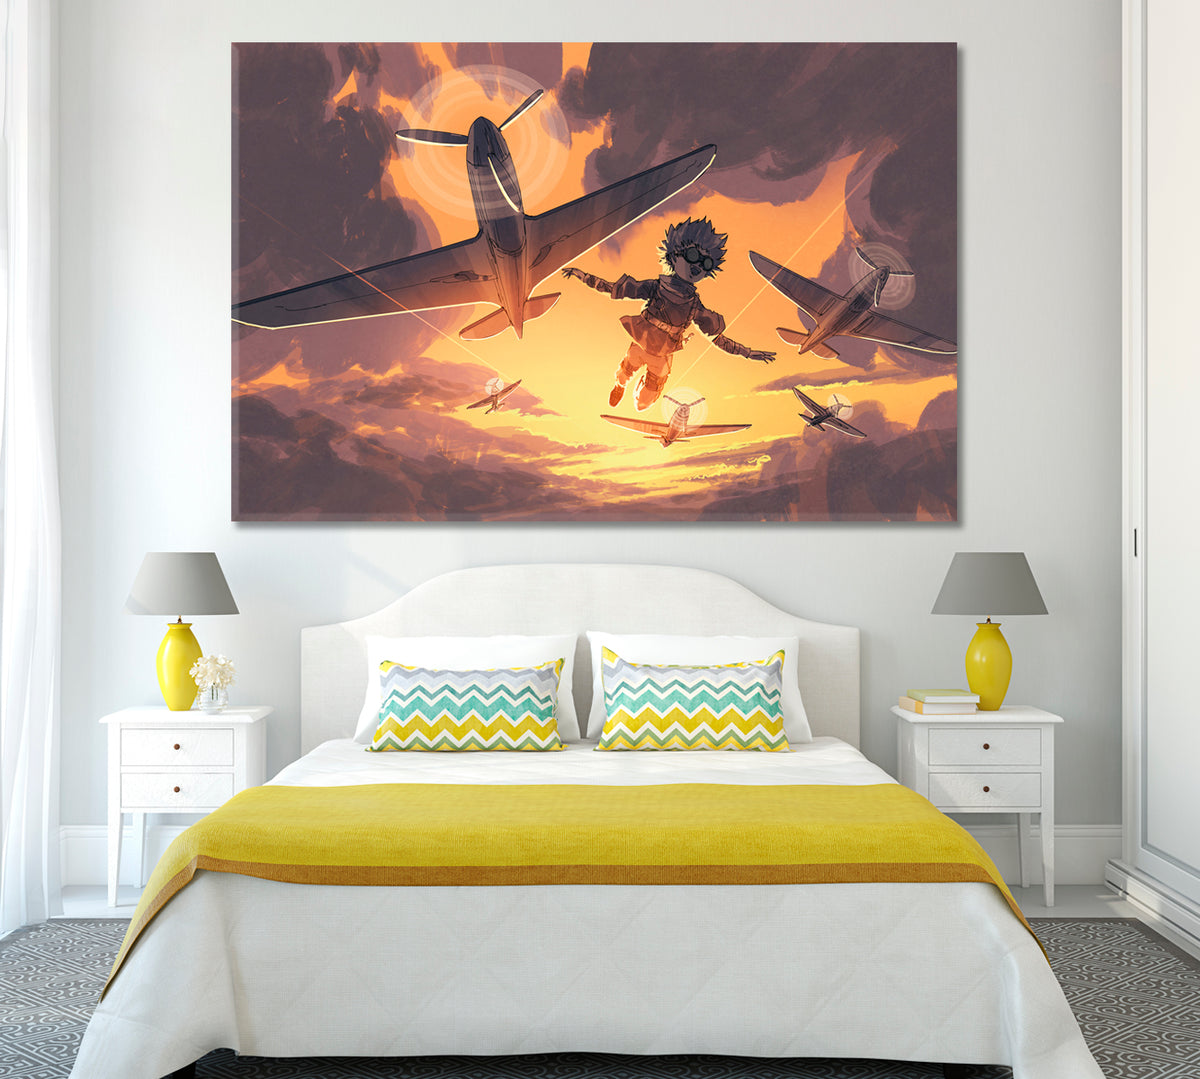 Boy Flying in Sky with Planes Canvas Print ArtLexy 1 Panel 24"x16" inches 